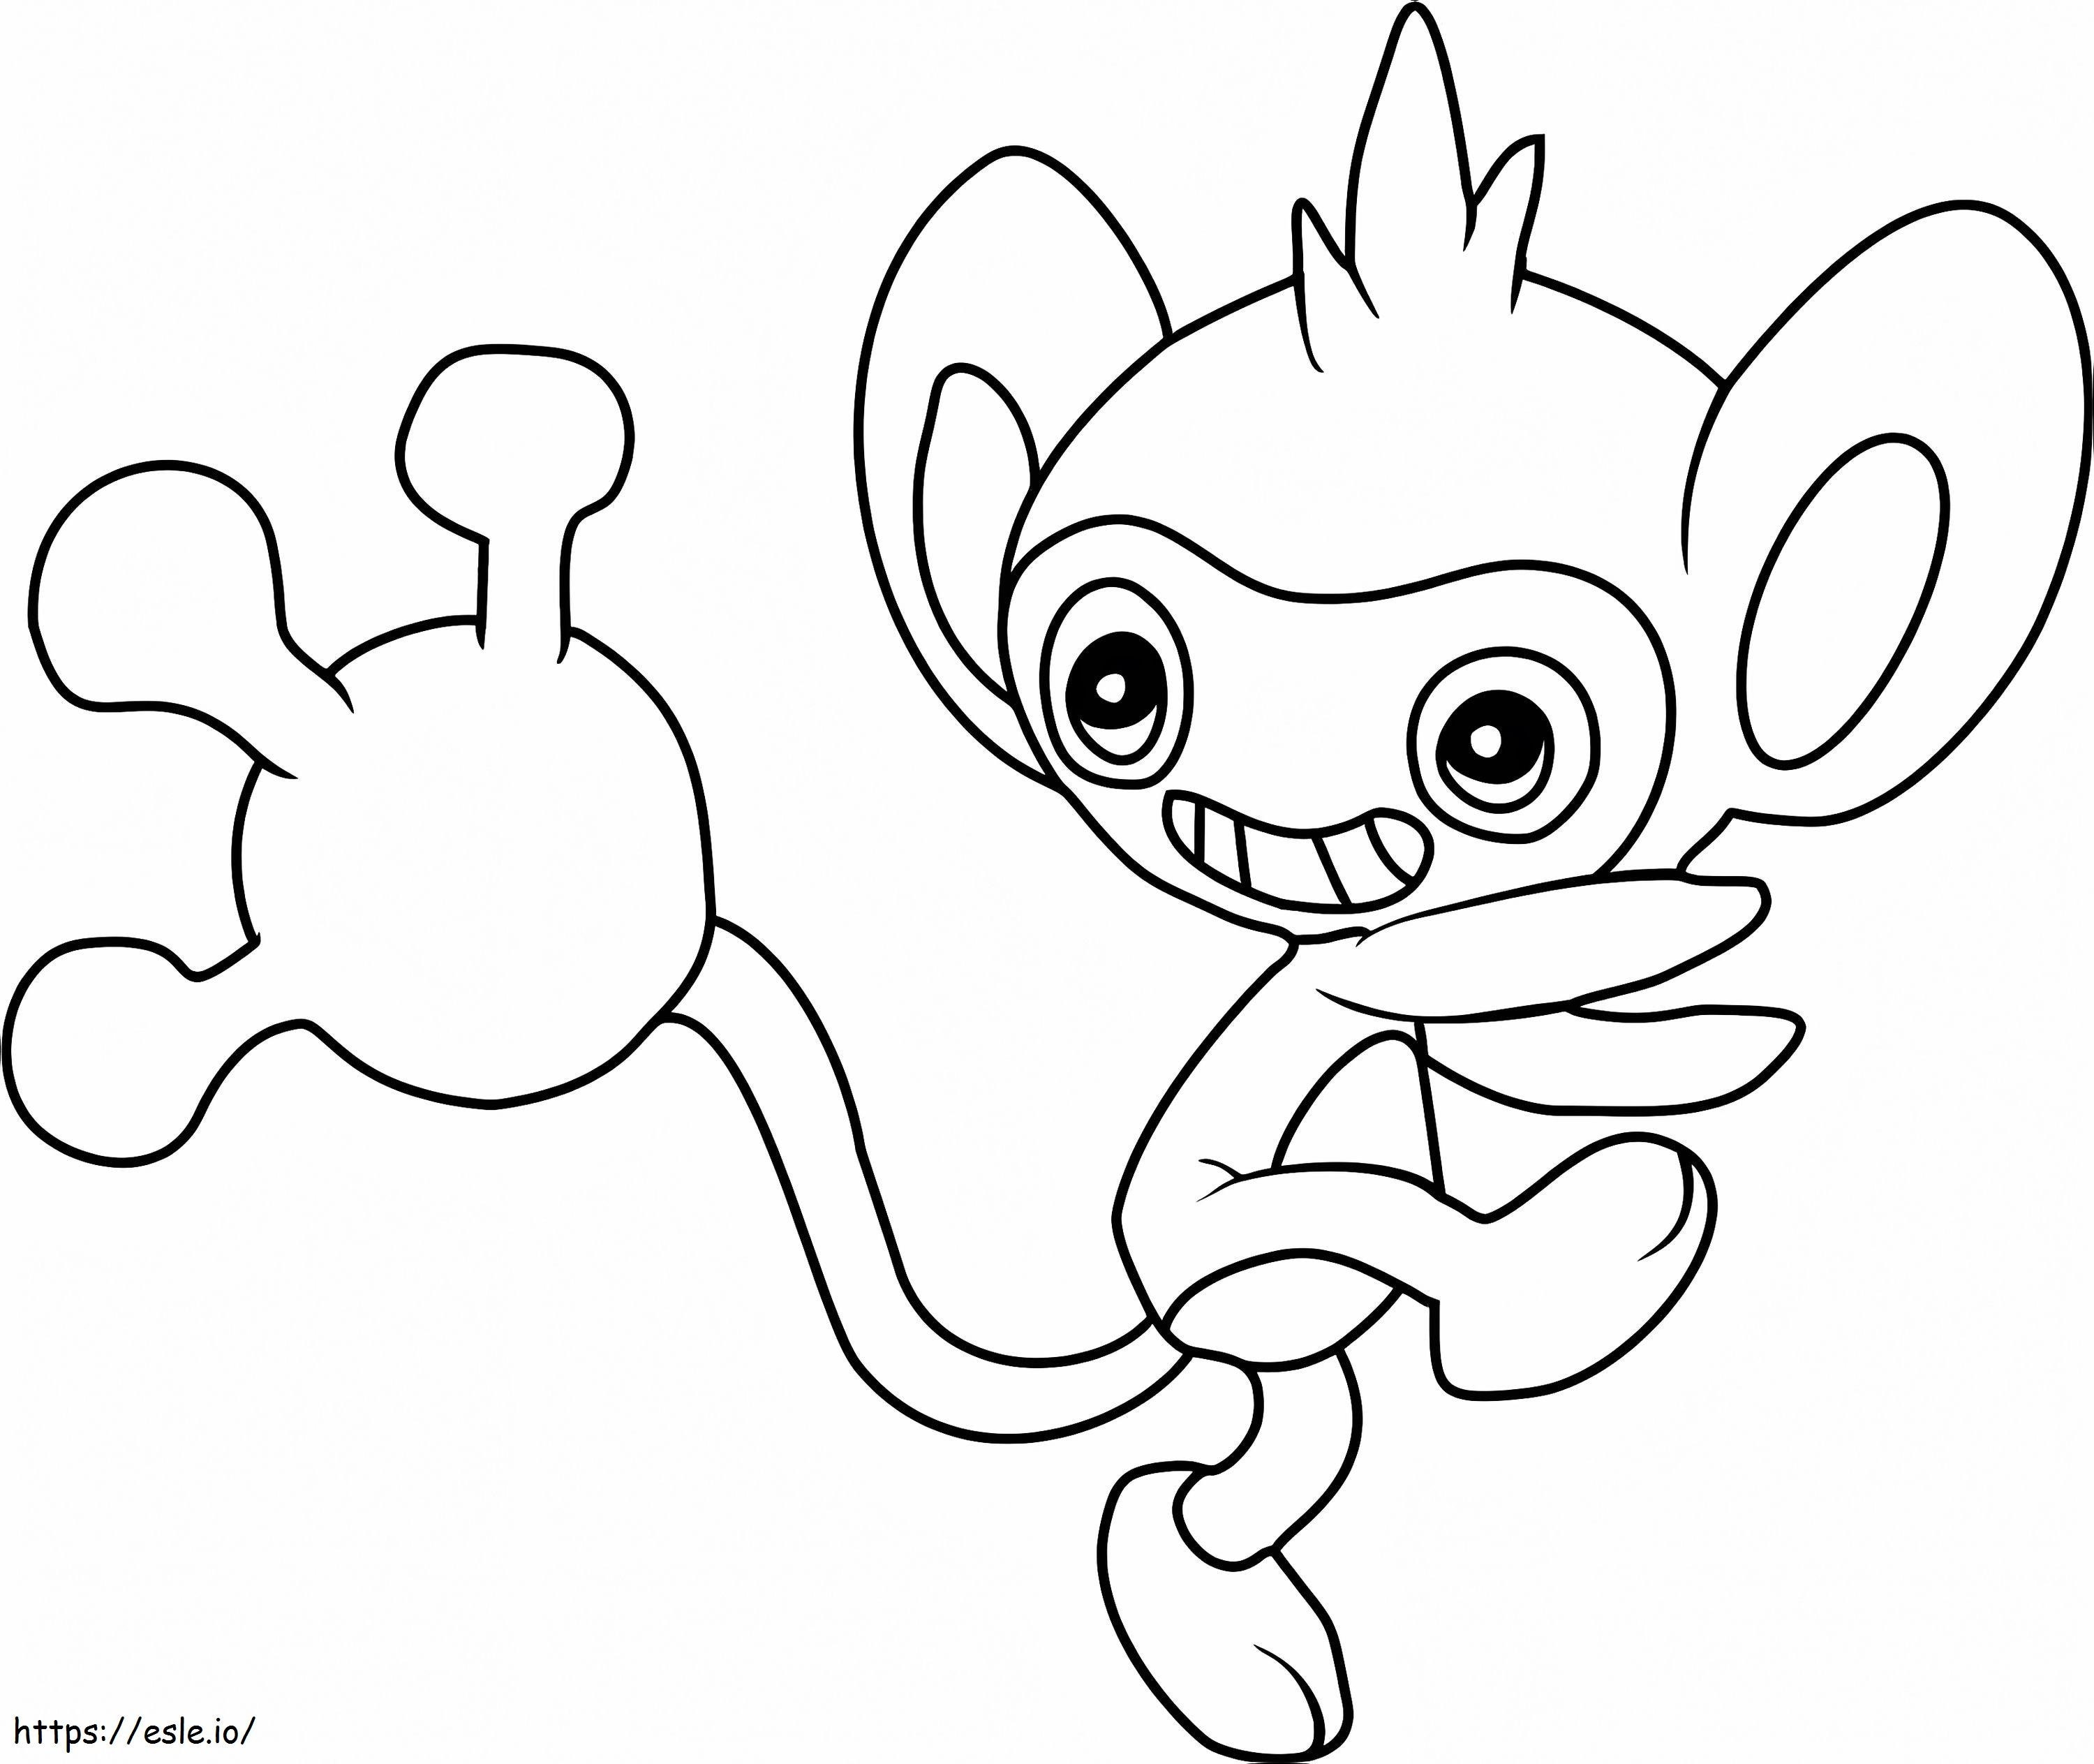 Aipom Not Pokemon coloring page